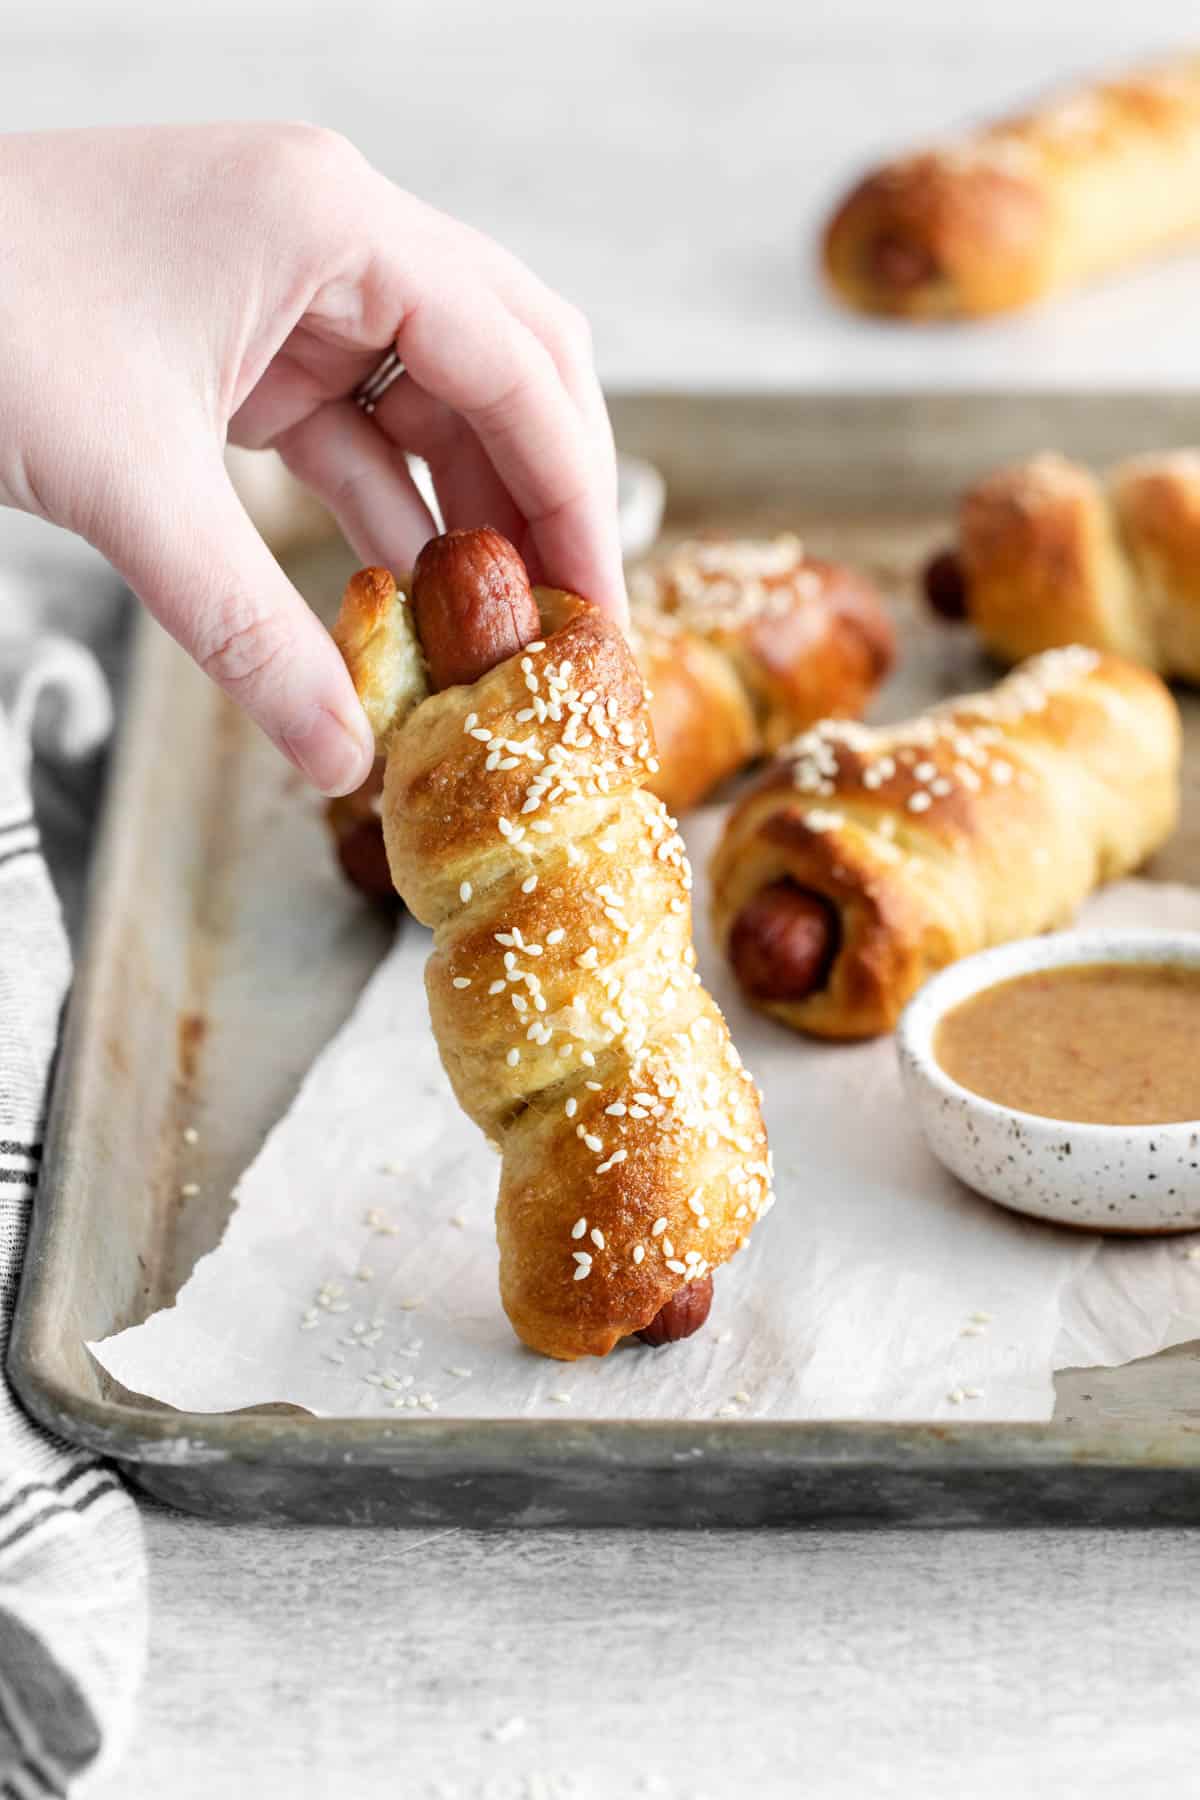 A hand holding a soft pretzel dog on a baking sheet with more pretzel dogs.